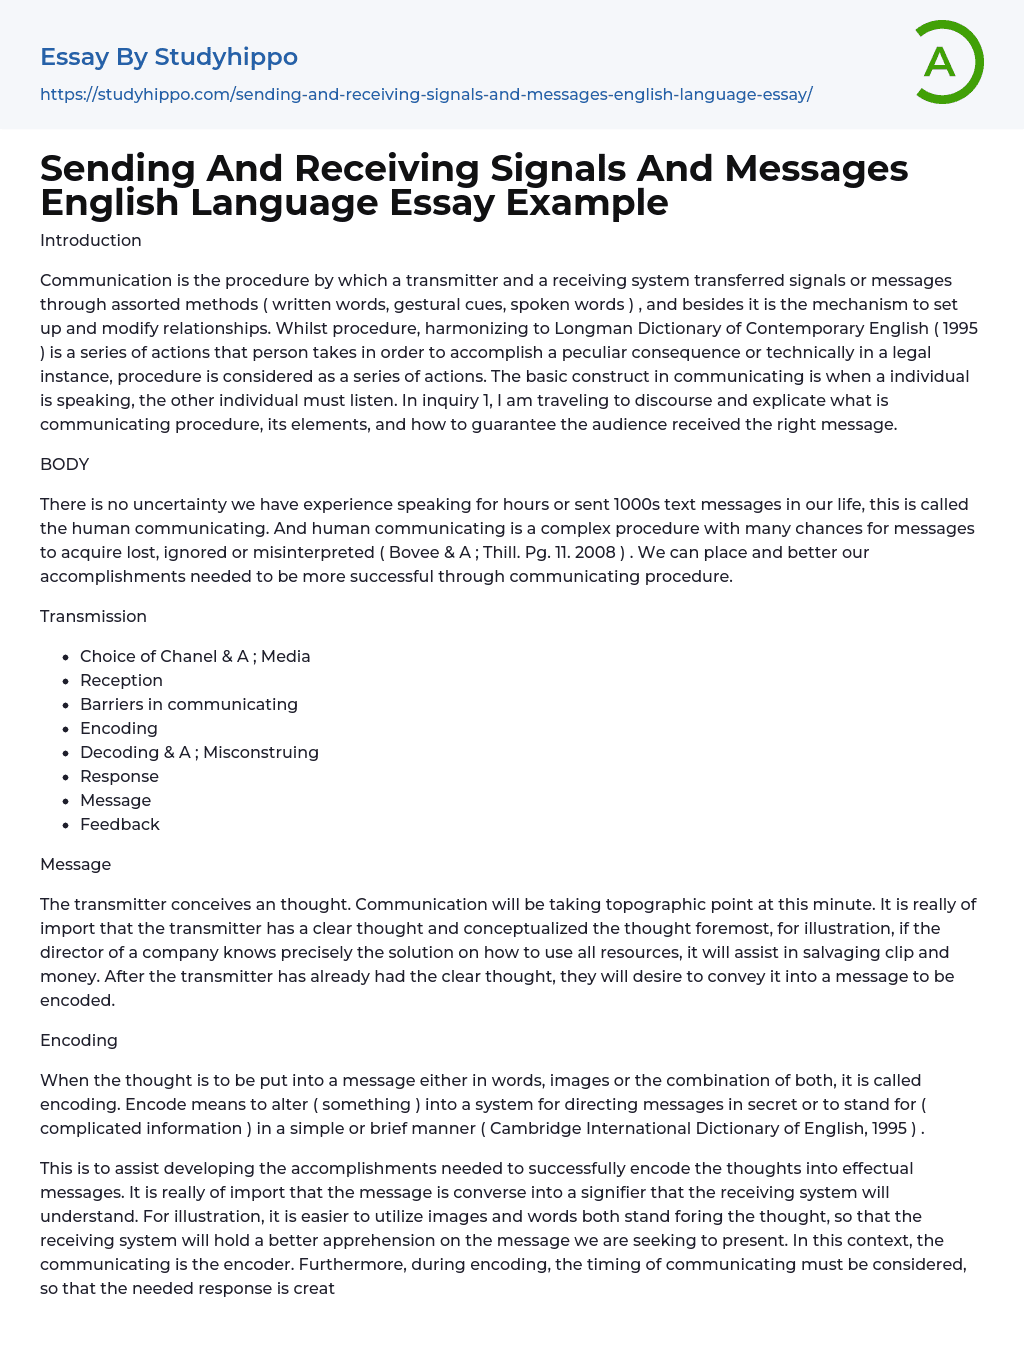 Sending And Receiving Signals And Messages English Language Essay Example